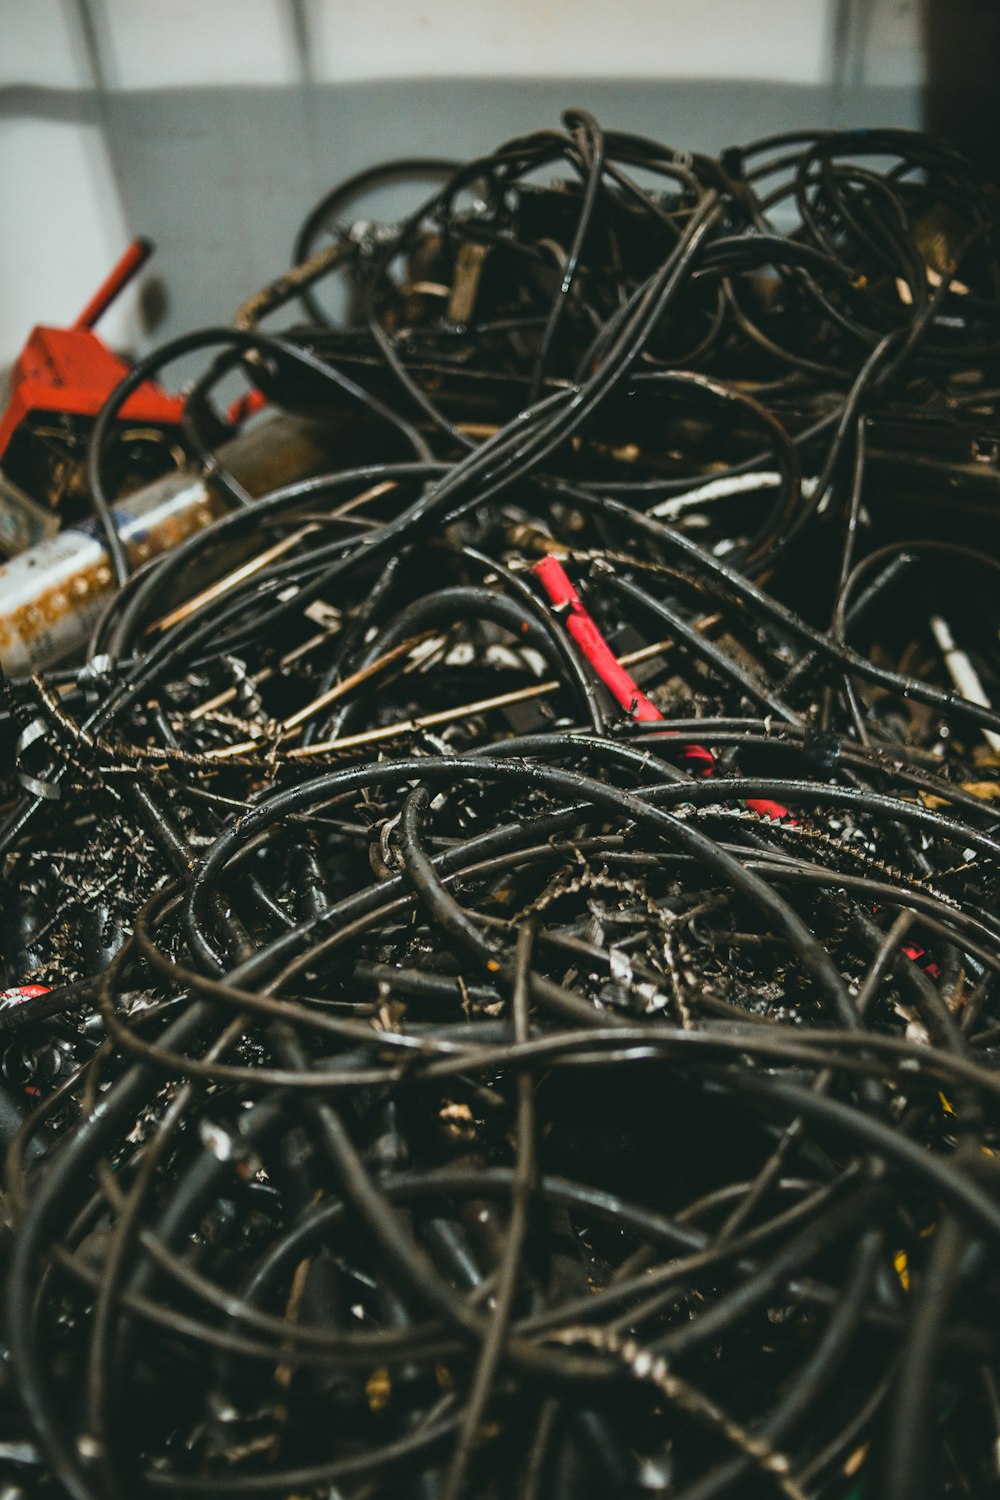 a pile of wires and wires in a bin